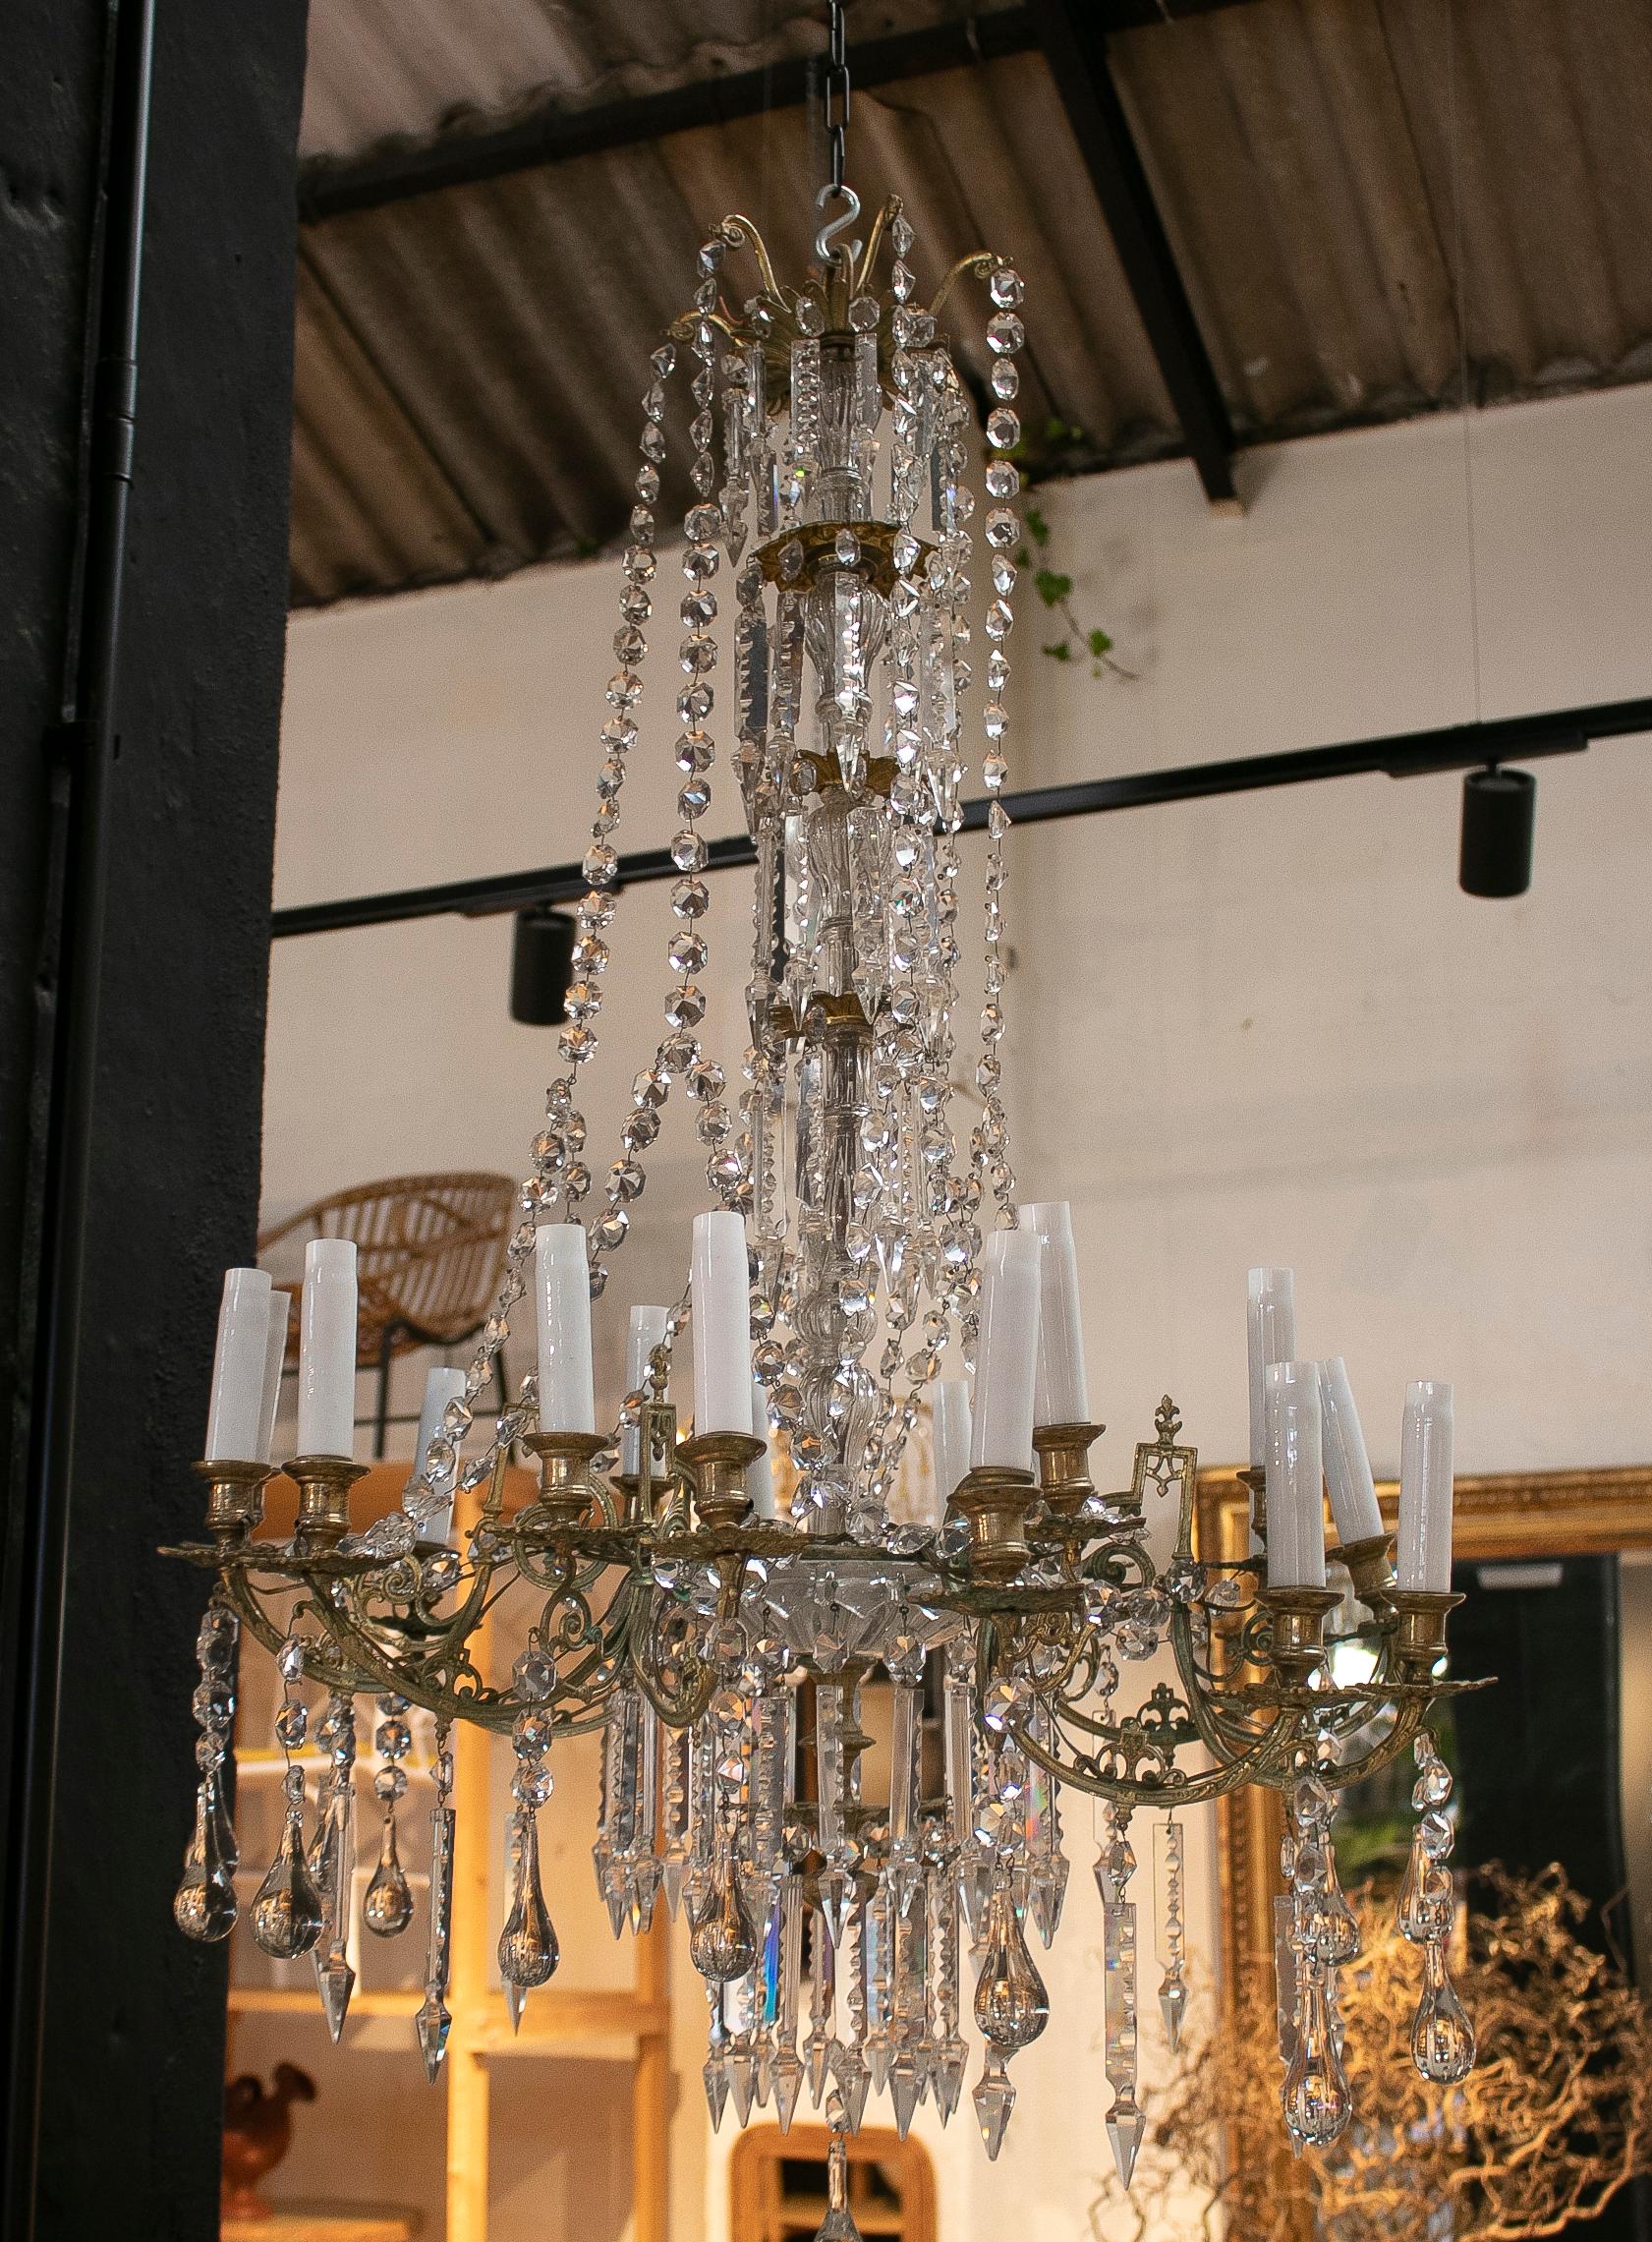 19th century Spanish fire gilt bronze chandelier with crystal decorations hanging ceiling lamp.